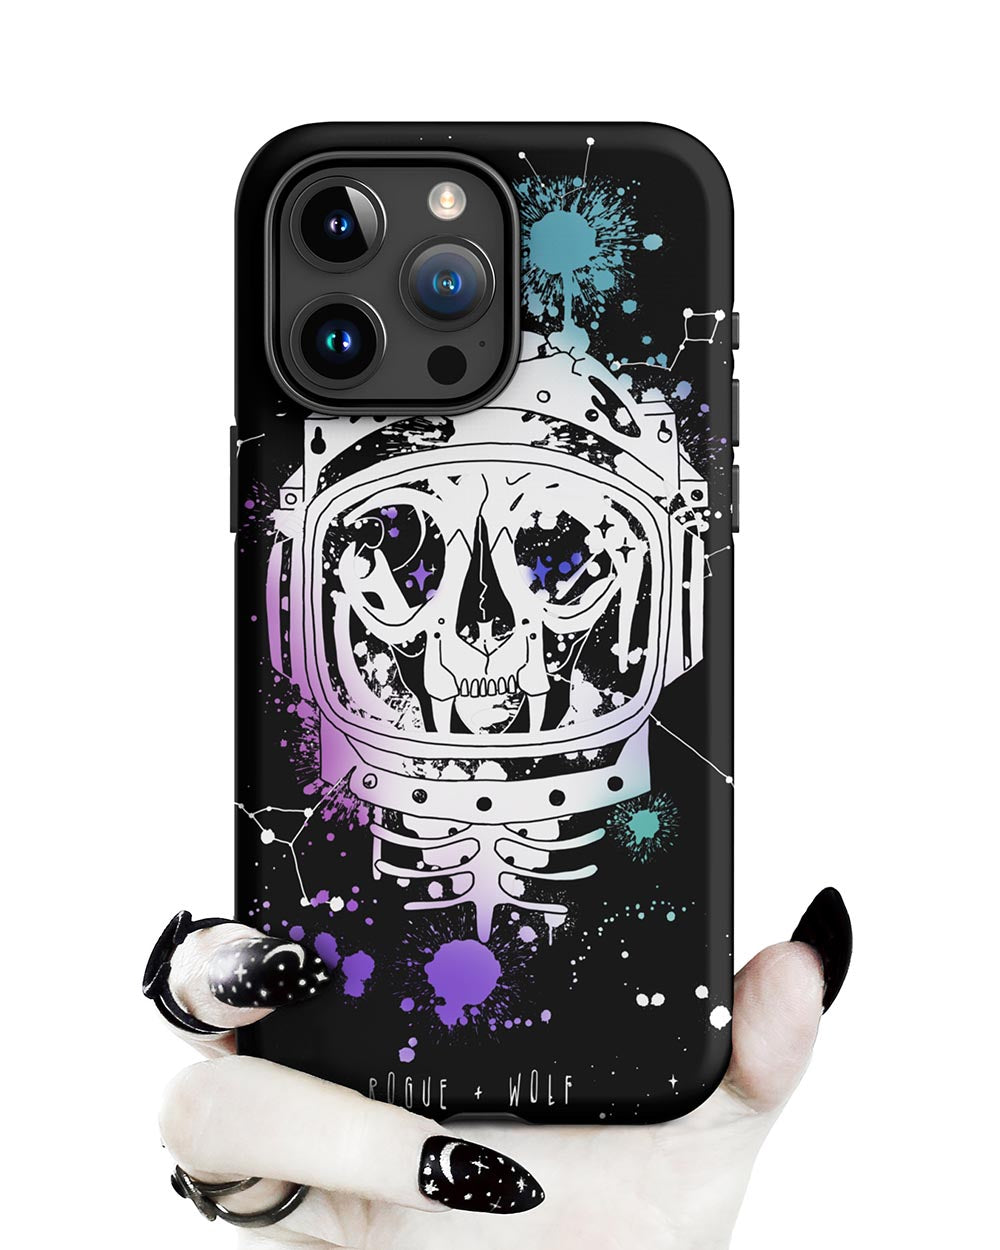 Cat-Astro-Phe Tough Phone Case for iPhone - Grunge Aesthetic Witchy Goth Cell Phone Cover Anti-Scratch Cool Gothic Gift